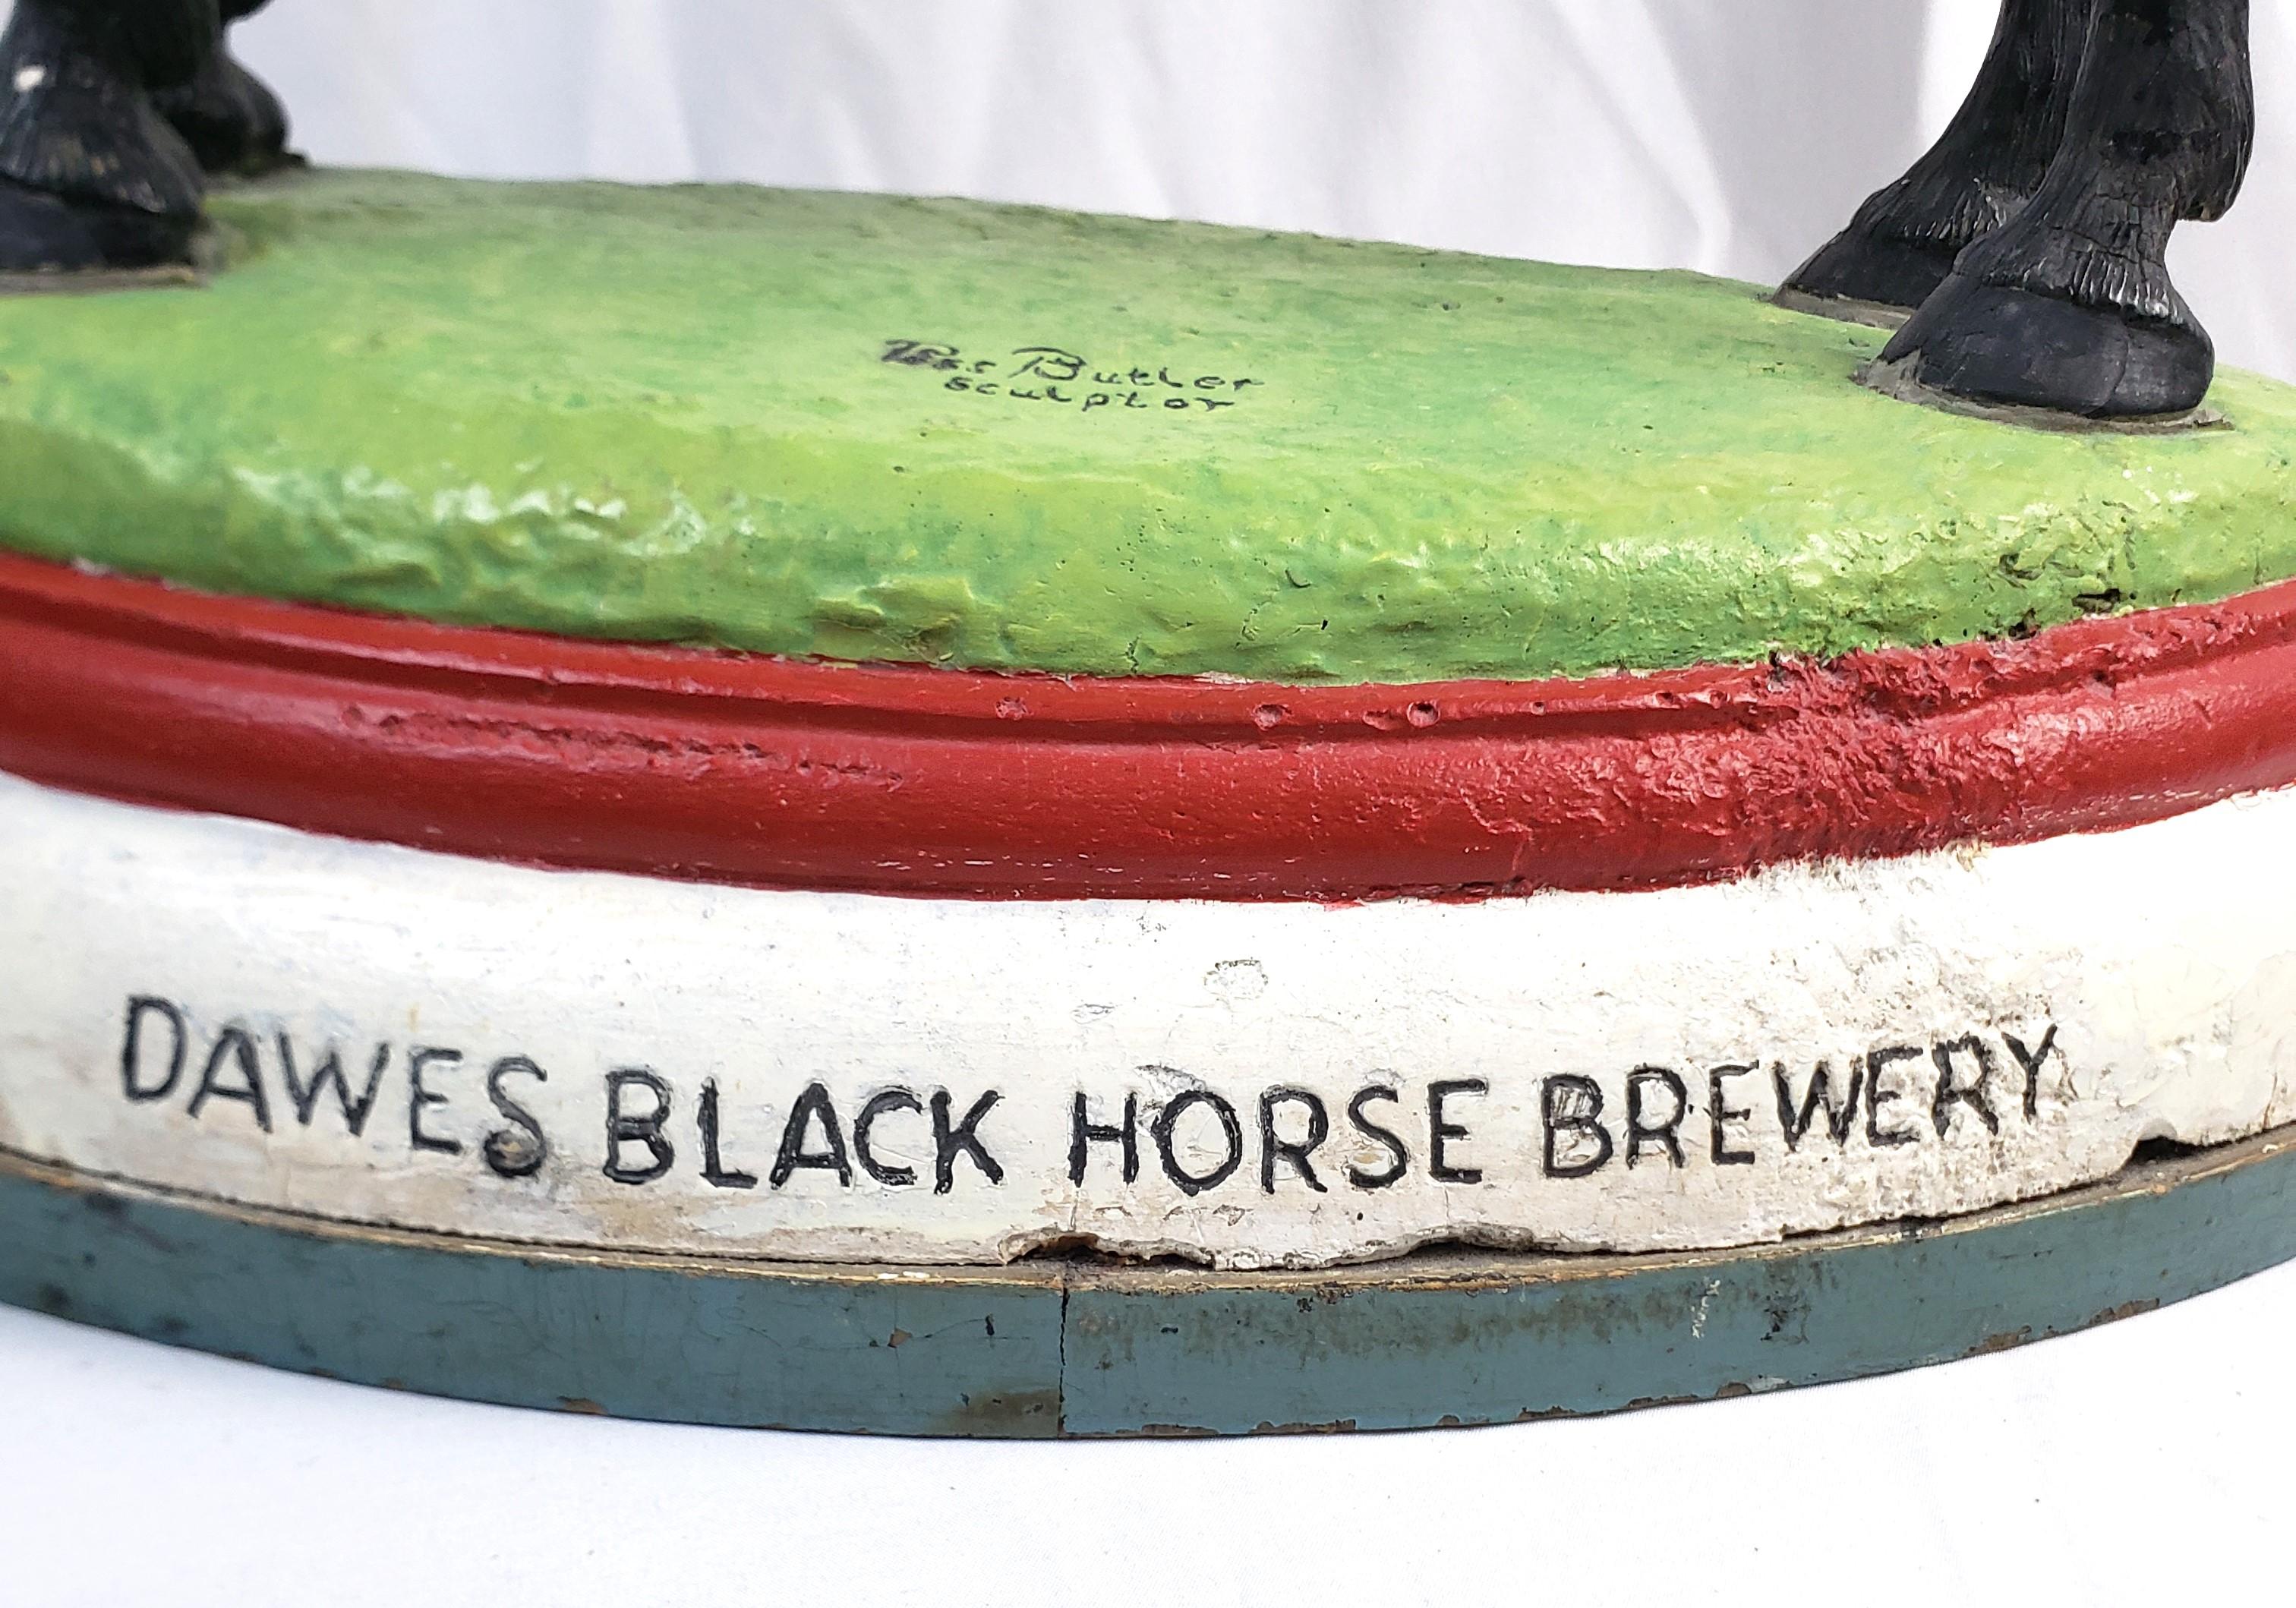 Dawes Black Horse Brewery Large Cast Advertising Horse Sculptural Lamp Base In Good Condition For Sale In Hamilton, Ontario